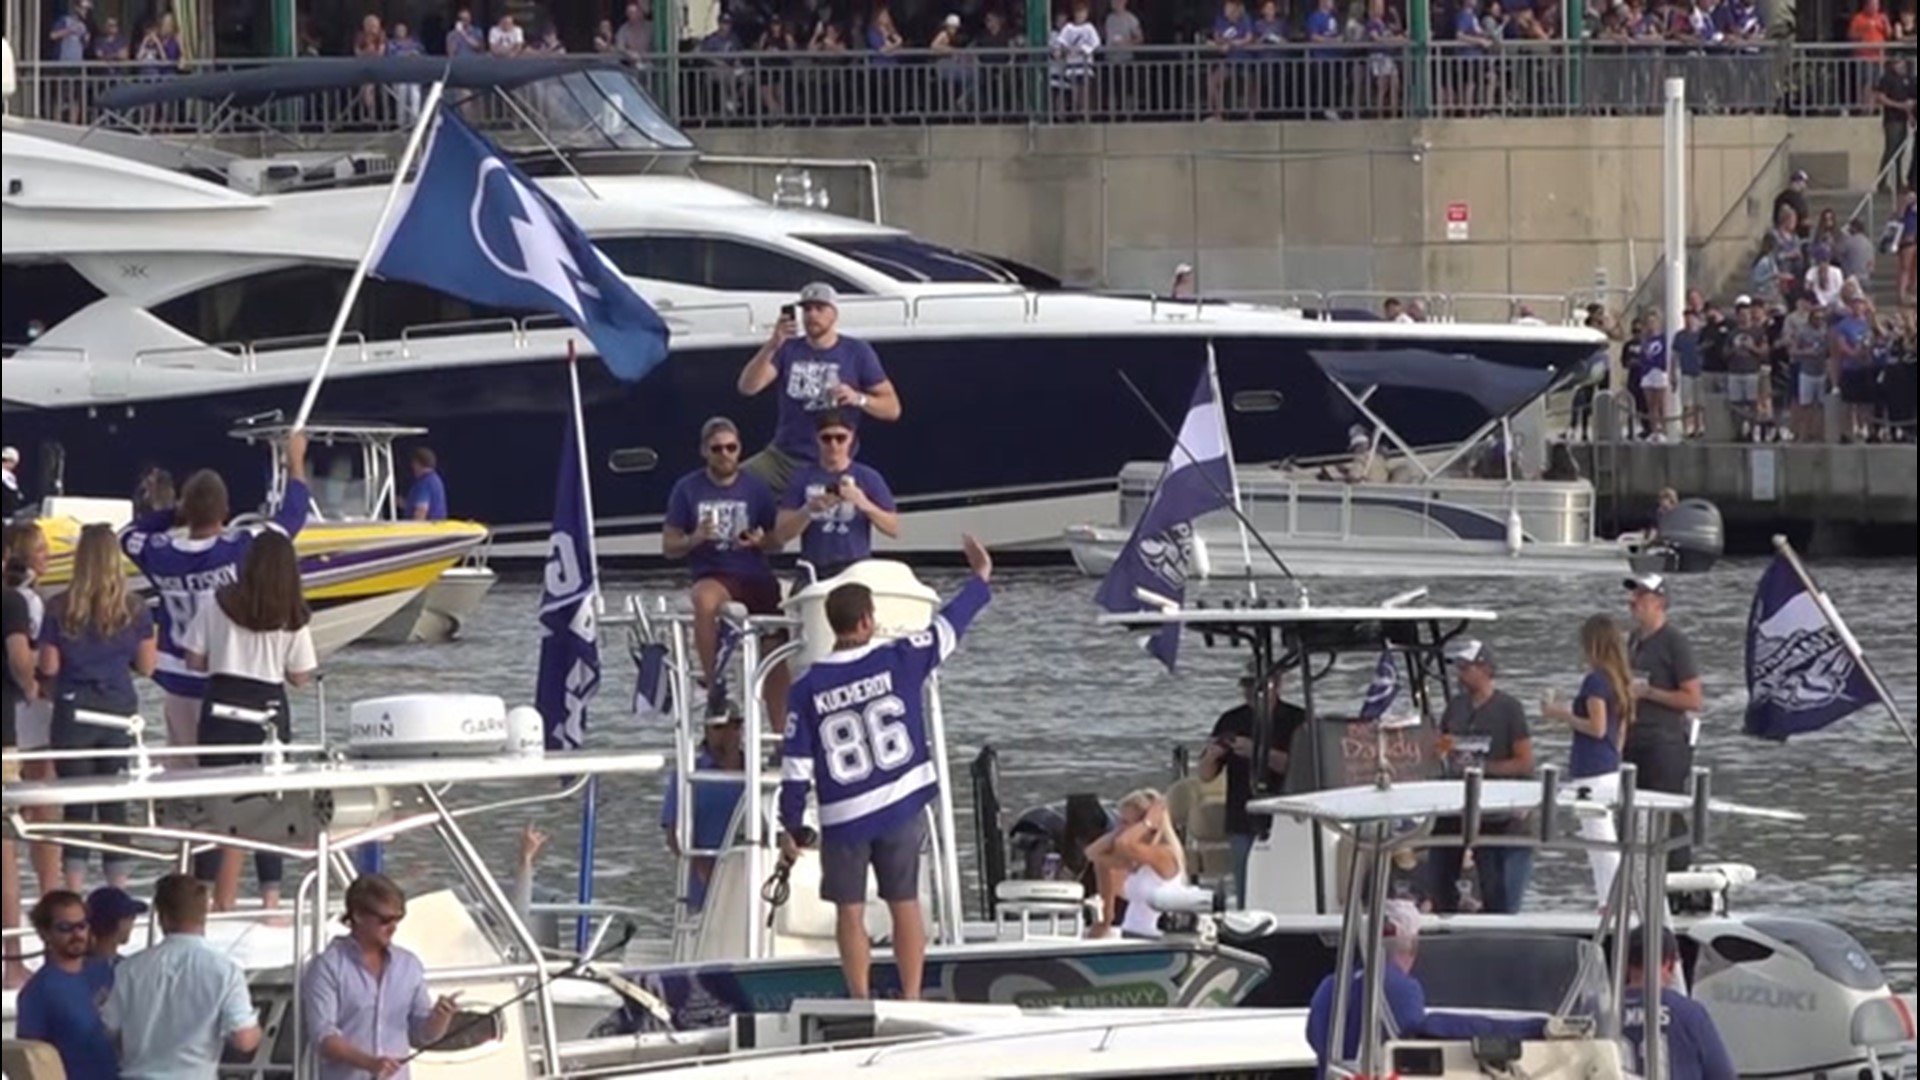 The Tampa Bay Lightning players and the Stanley Cup cruised on boats as a part of an adaptation of how to celebrate a championship during COVID-19.